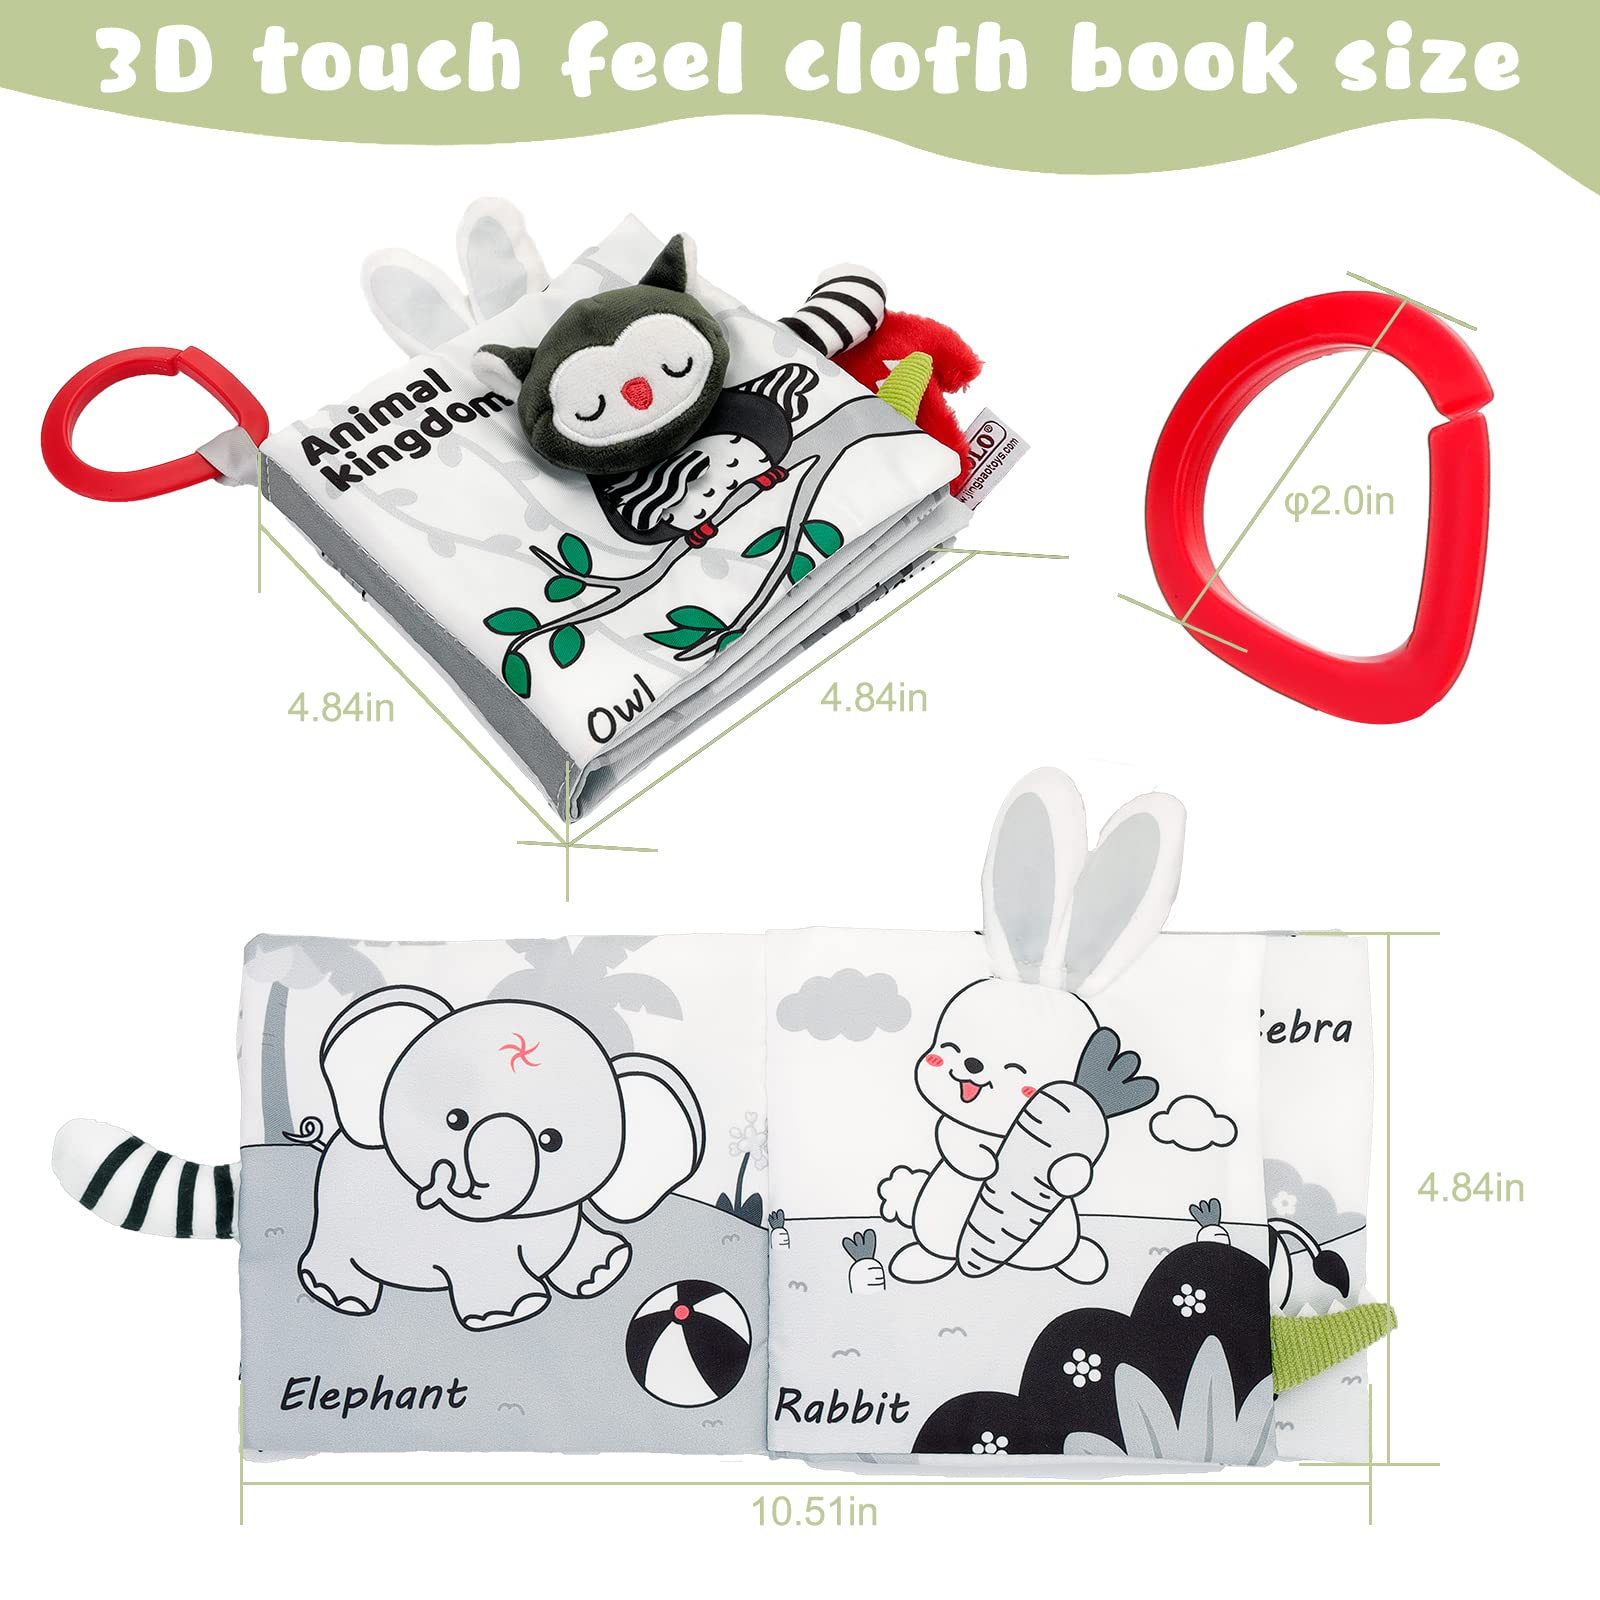 Crinkle Soft Baby Books 0-6 Months, 3D Touch Feel High Contrast Cloth Book Sensory Baby Toys 0-6-12 Months, Early Learning Stroller Toys for Infants Toddler Gifts Toy, Forest Jungle Tails